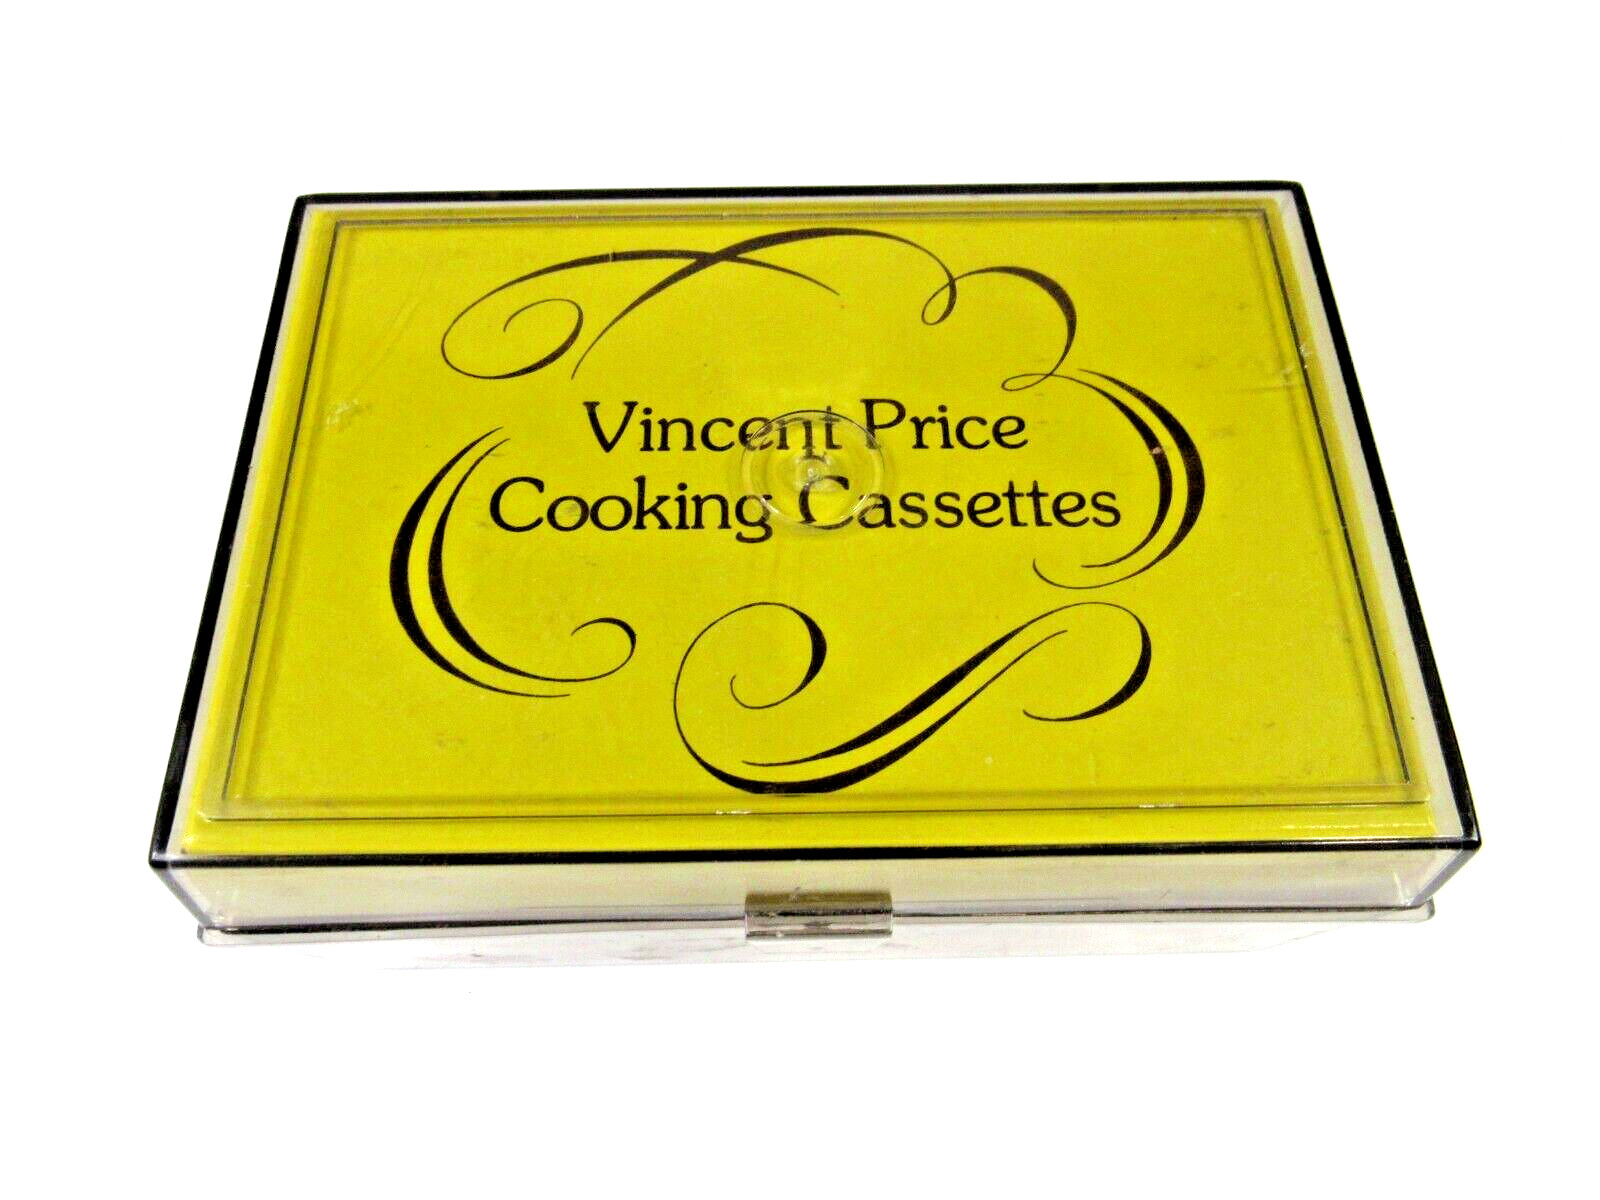 Vintage Rare Cooking with Vincent Price Cassettes - Prototype? - OOAK? - Horror